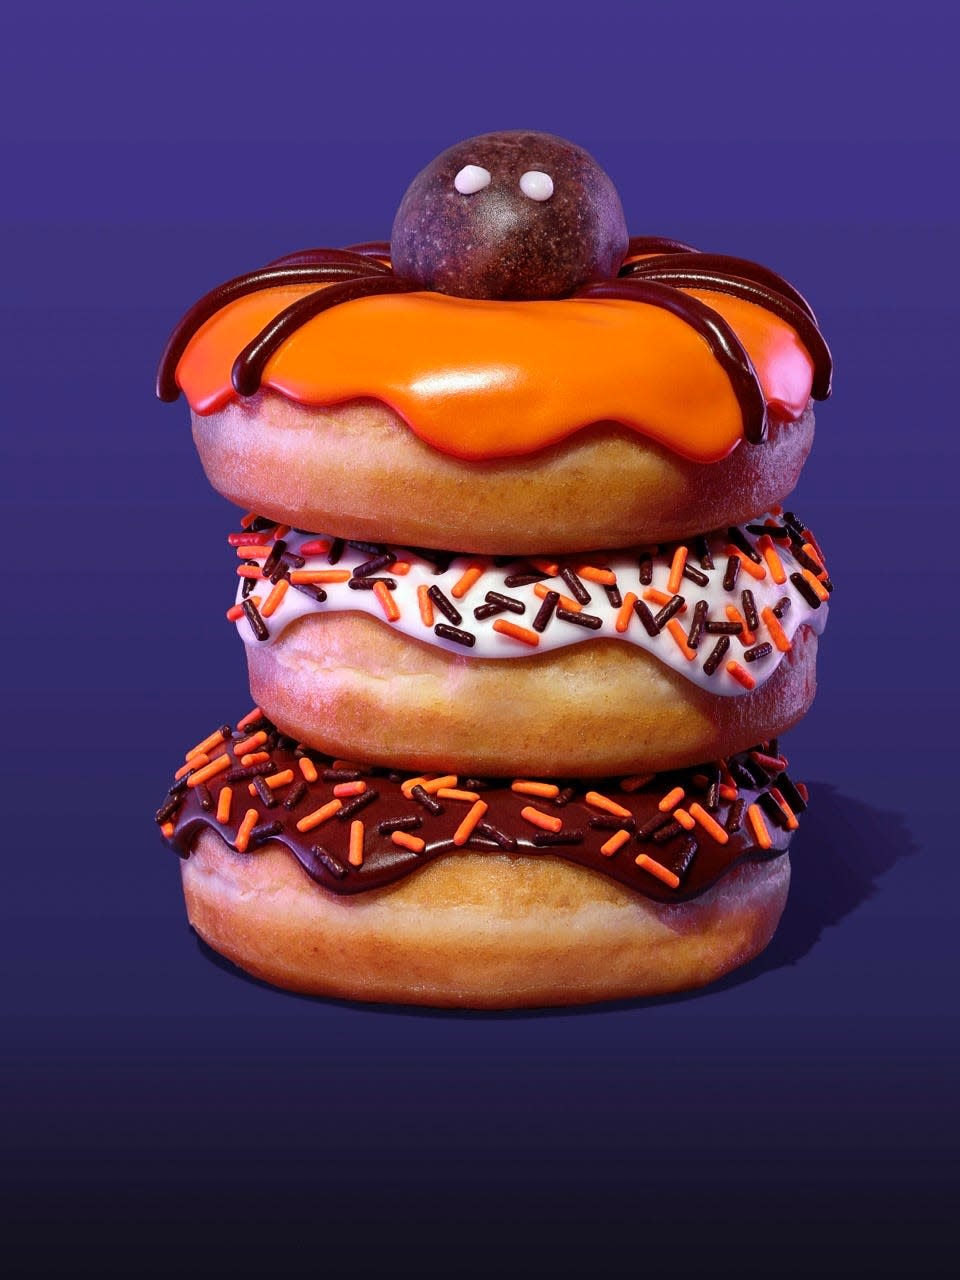 This Halloween season, Dunkin' has a Spider Donut and chocolate & orange sprinkled versions of the classic chocolate, vanilla and strawberry frosted donuts.